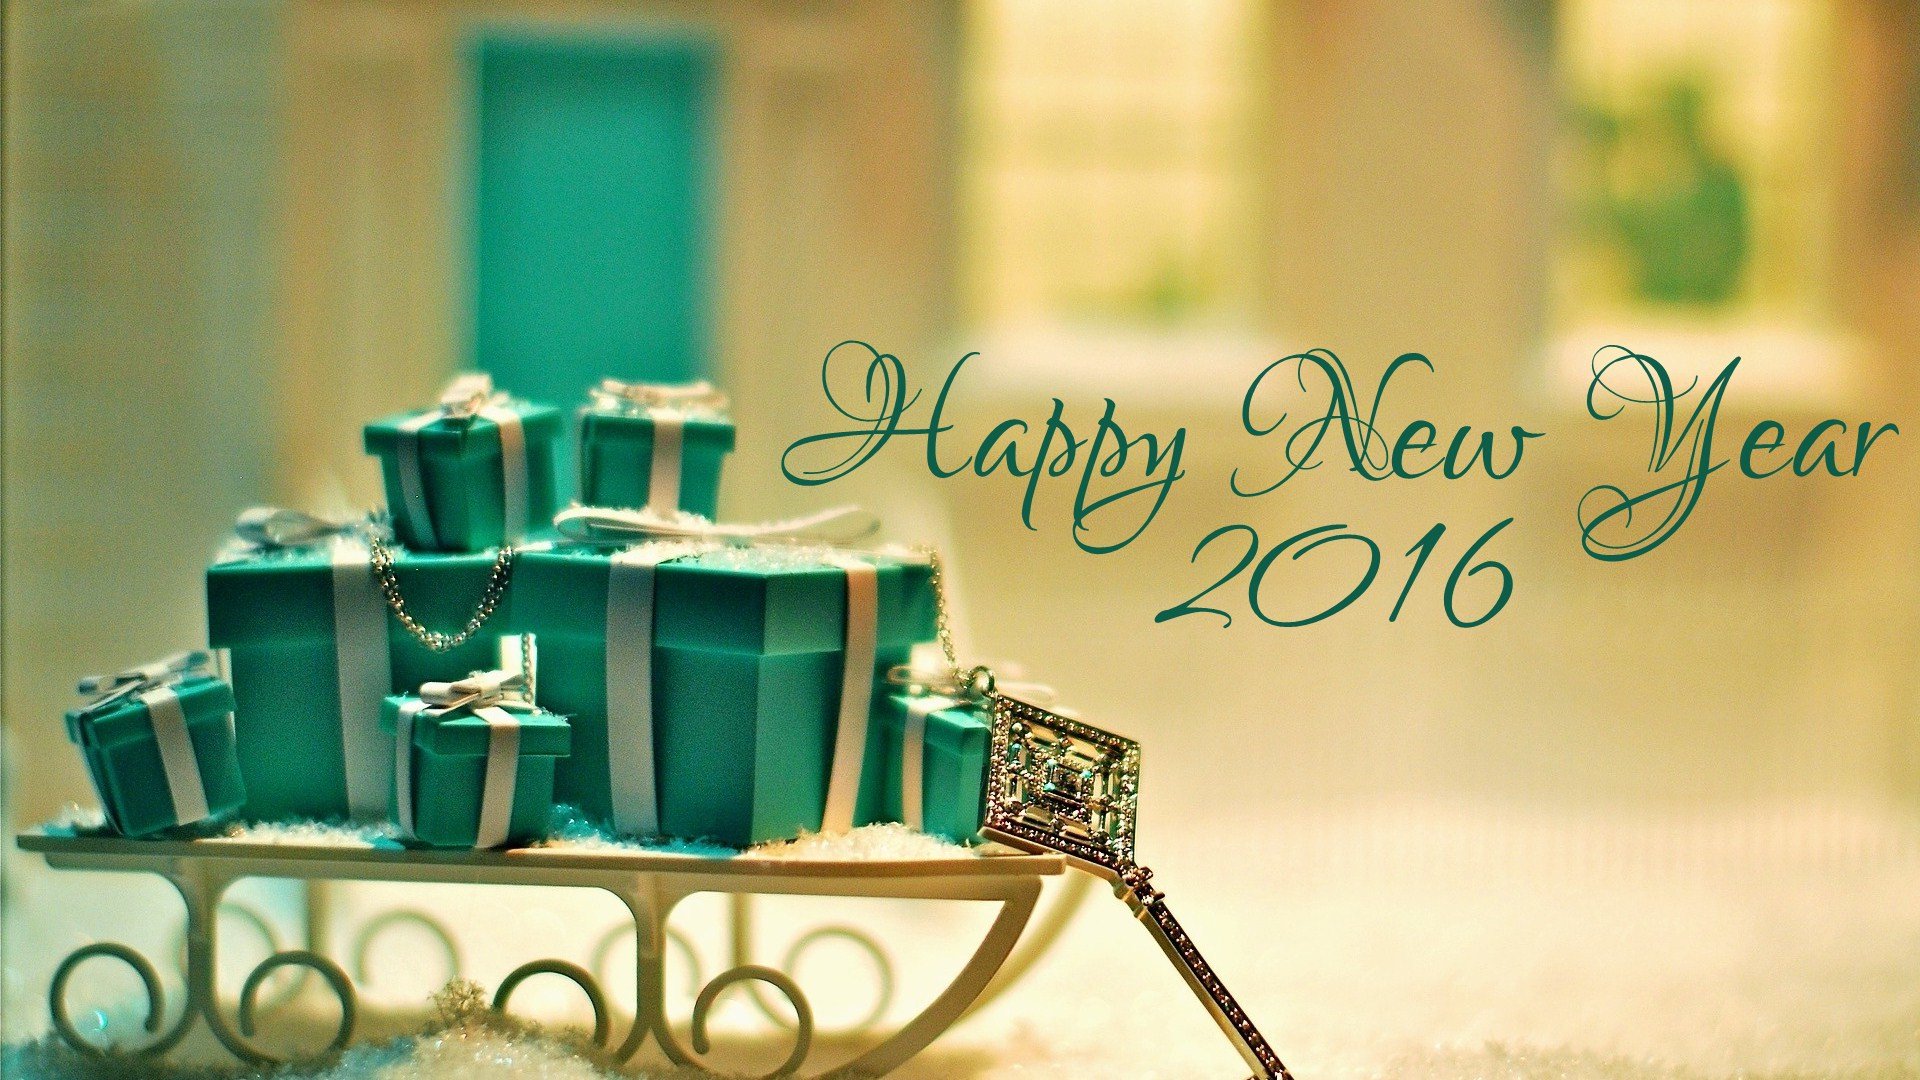 Best New Year 2016 wallpaper ID:256755 for High Resolution hd 1920x1080 computer